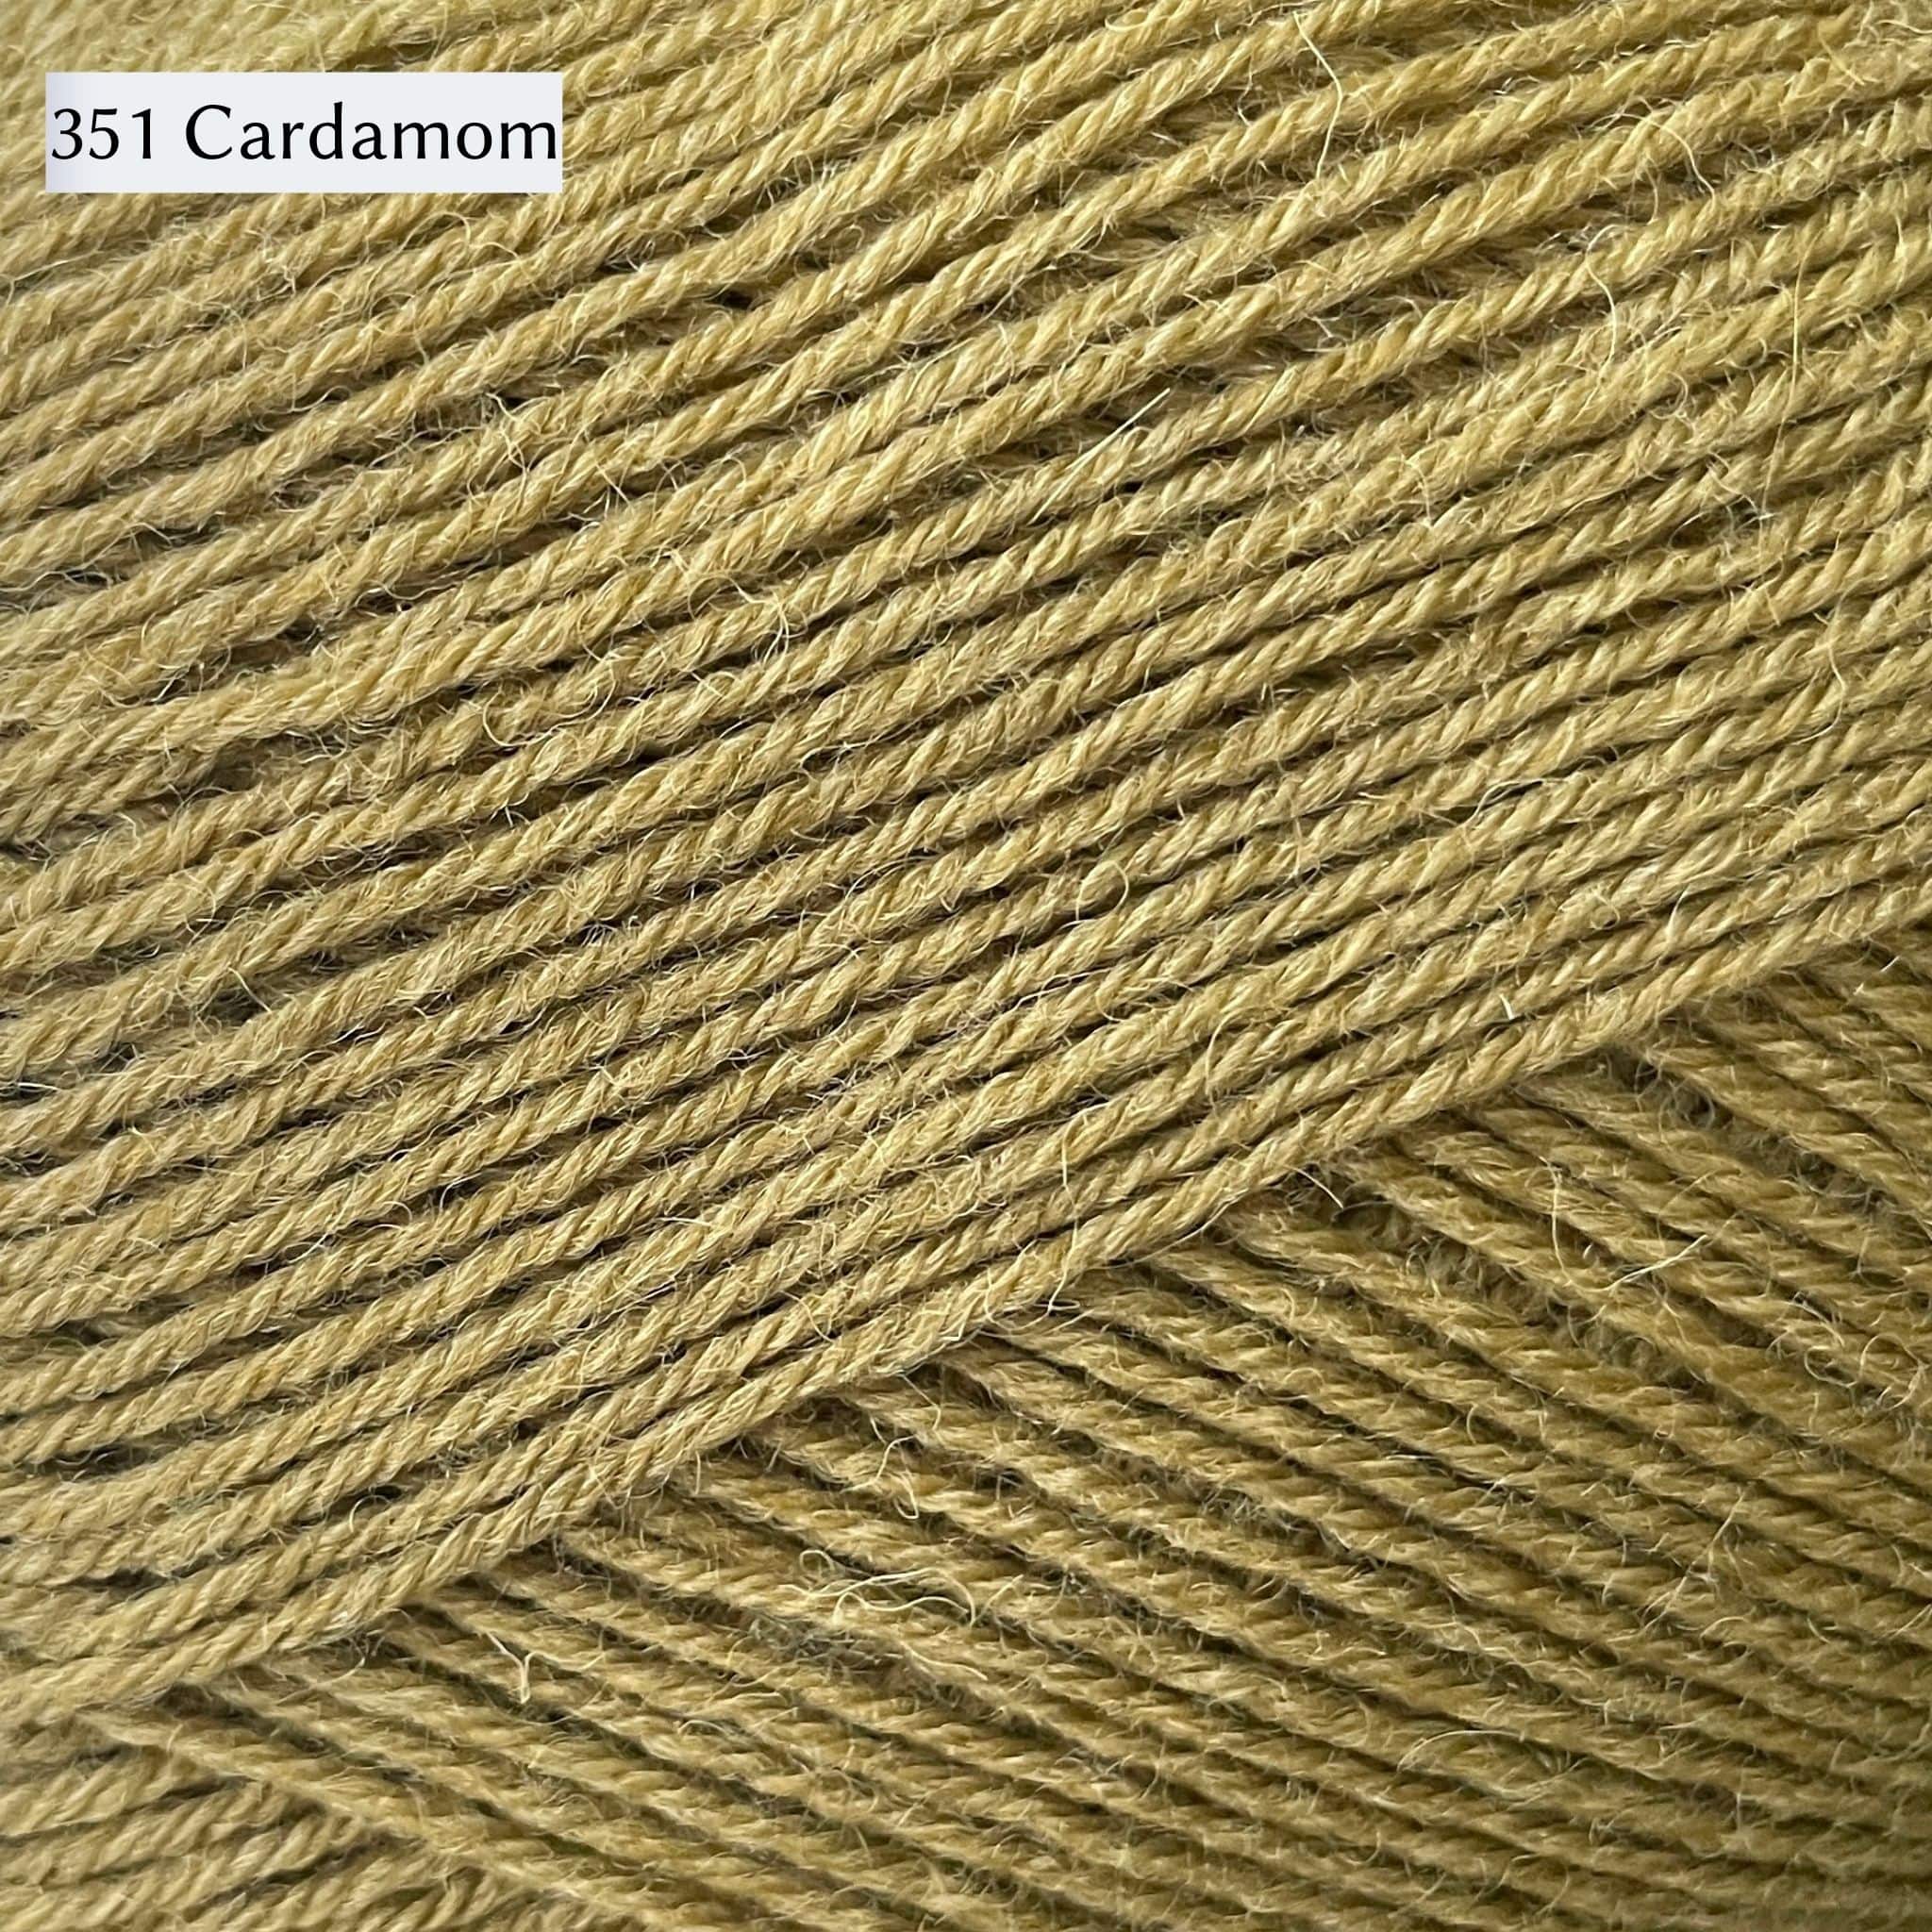 West Yorkshire Spinners Signature 4ply yarn, 100-gram ball, fingering weight, in color 351 Cardamom, a light straw olive green